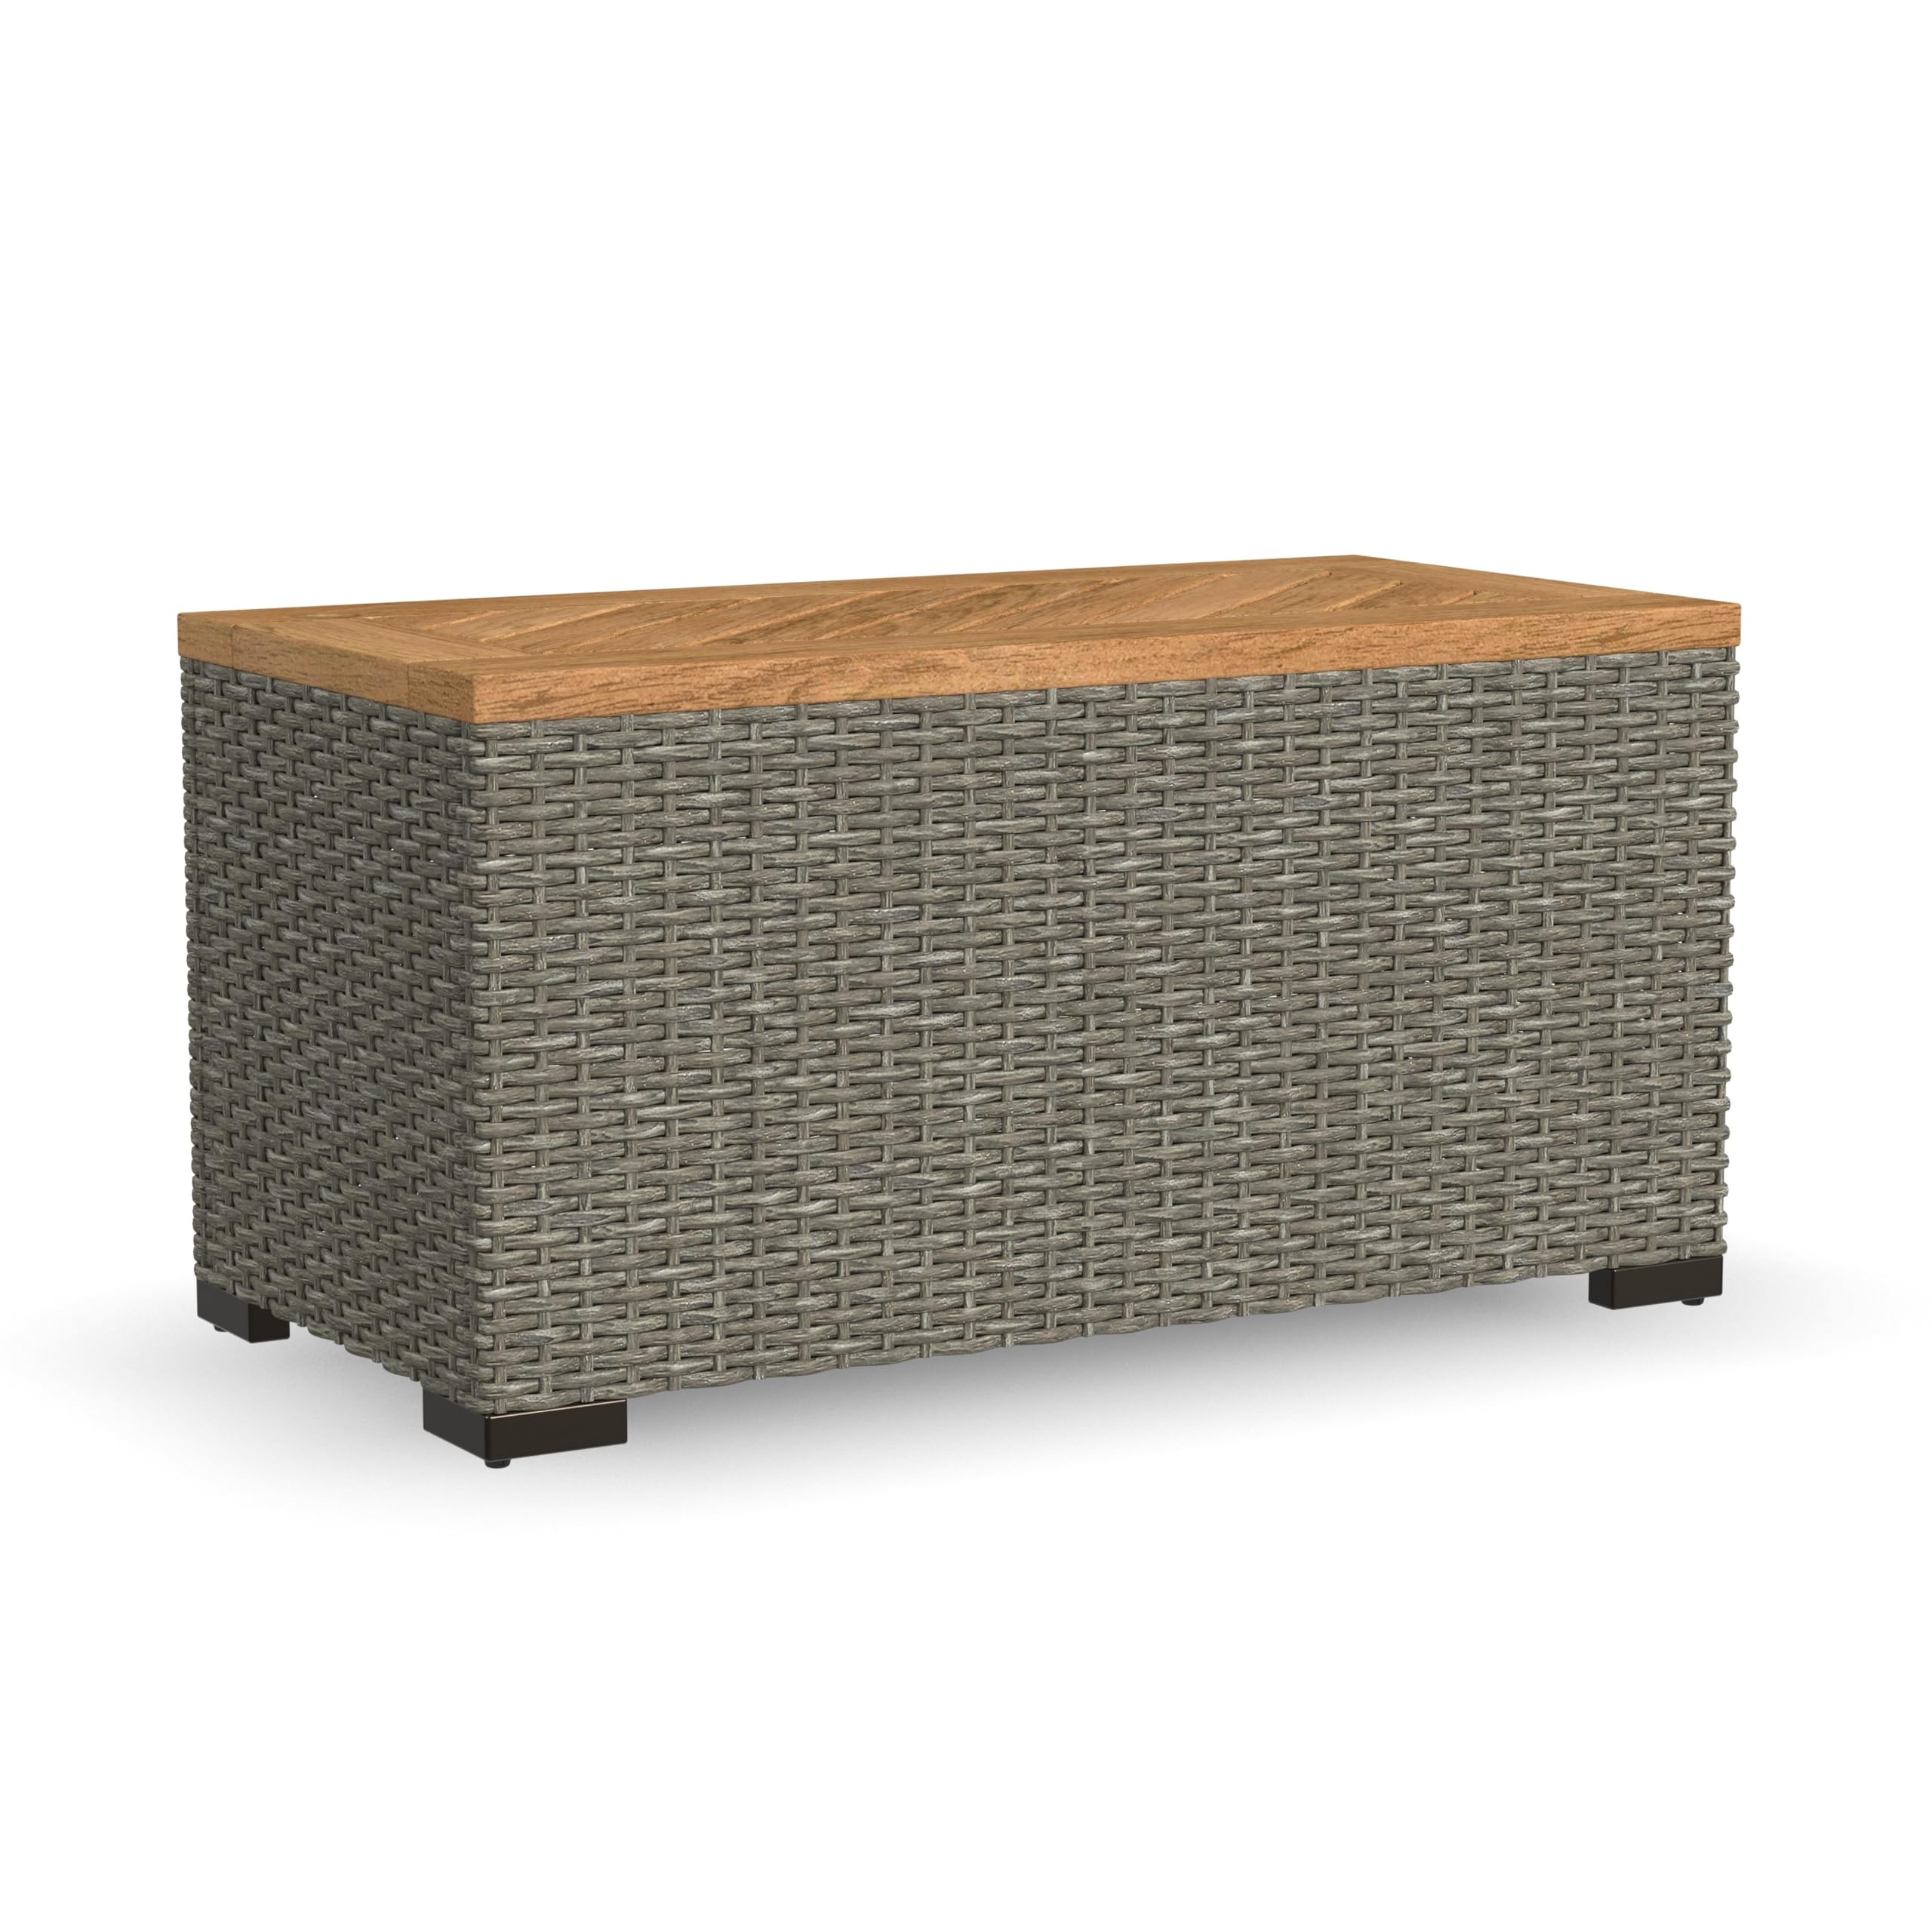 Homestyles Boca Raton Outdoor Wicker Furniture (Grey): Storage Table $54.70 or Arm Chair $95.42 + Free Shipping